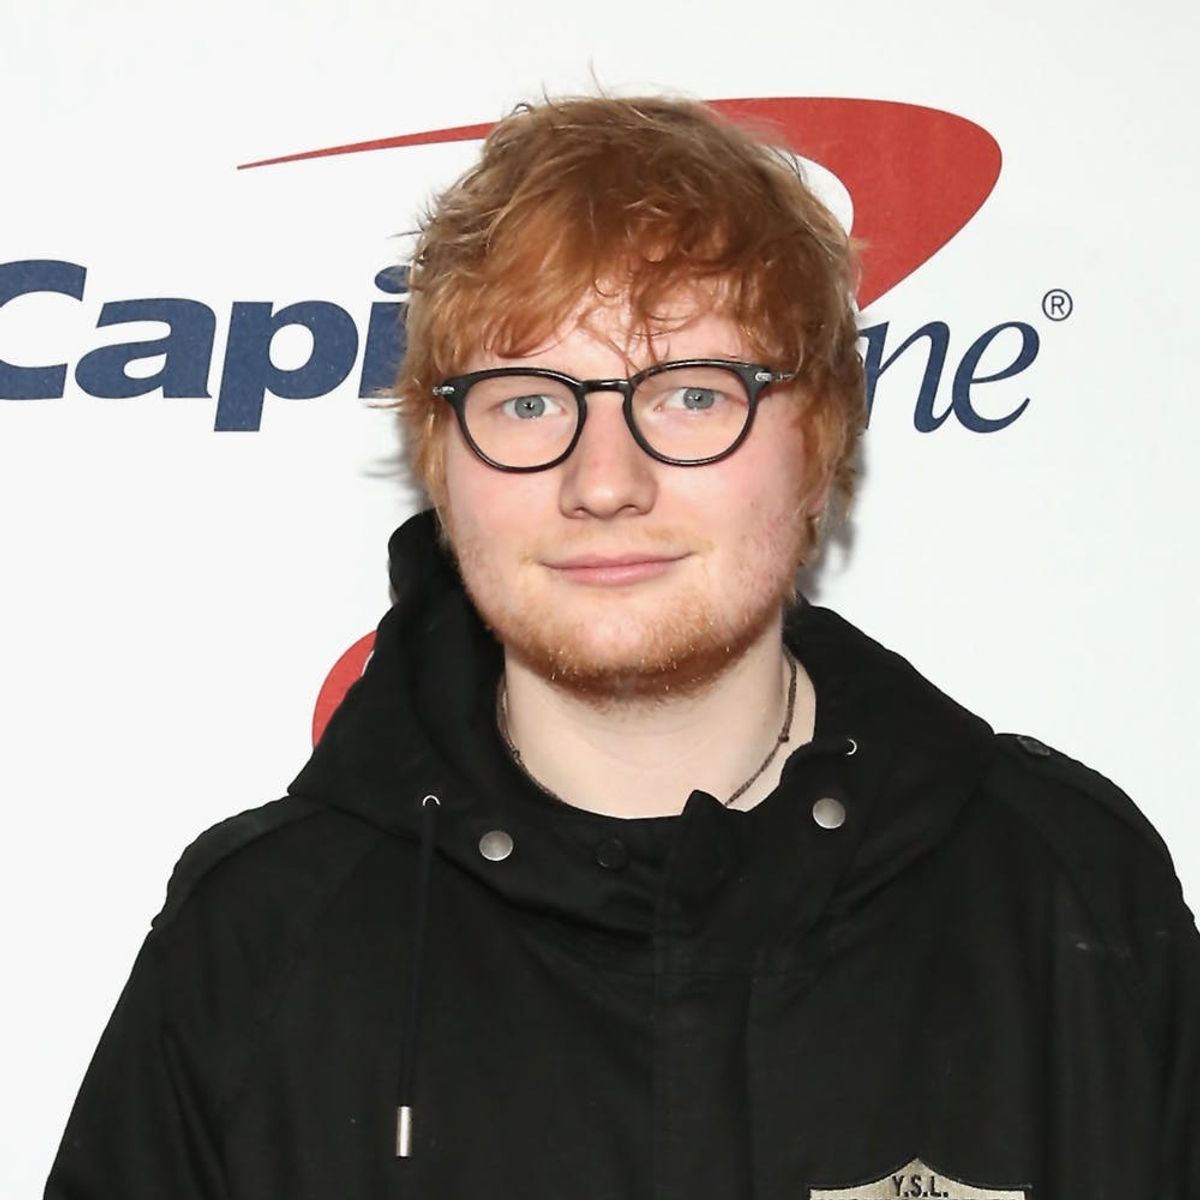 Ed Sheeran Just Announced His Engagement in the Sweetest Way Possible